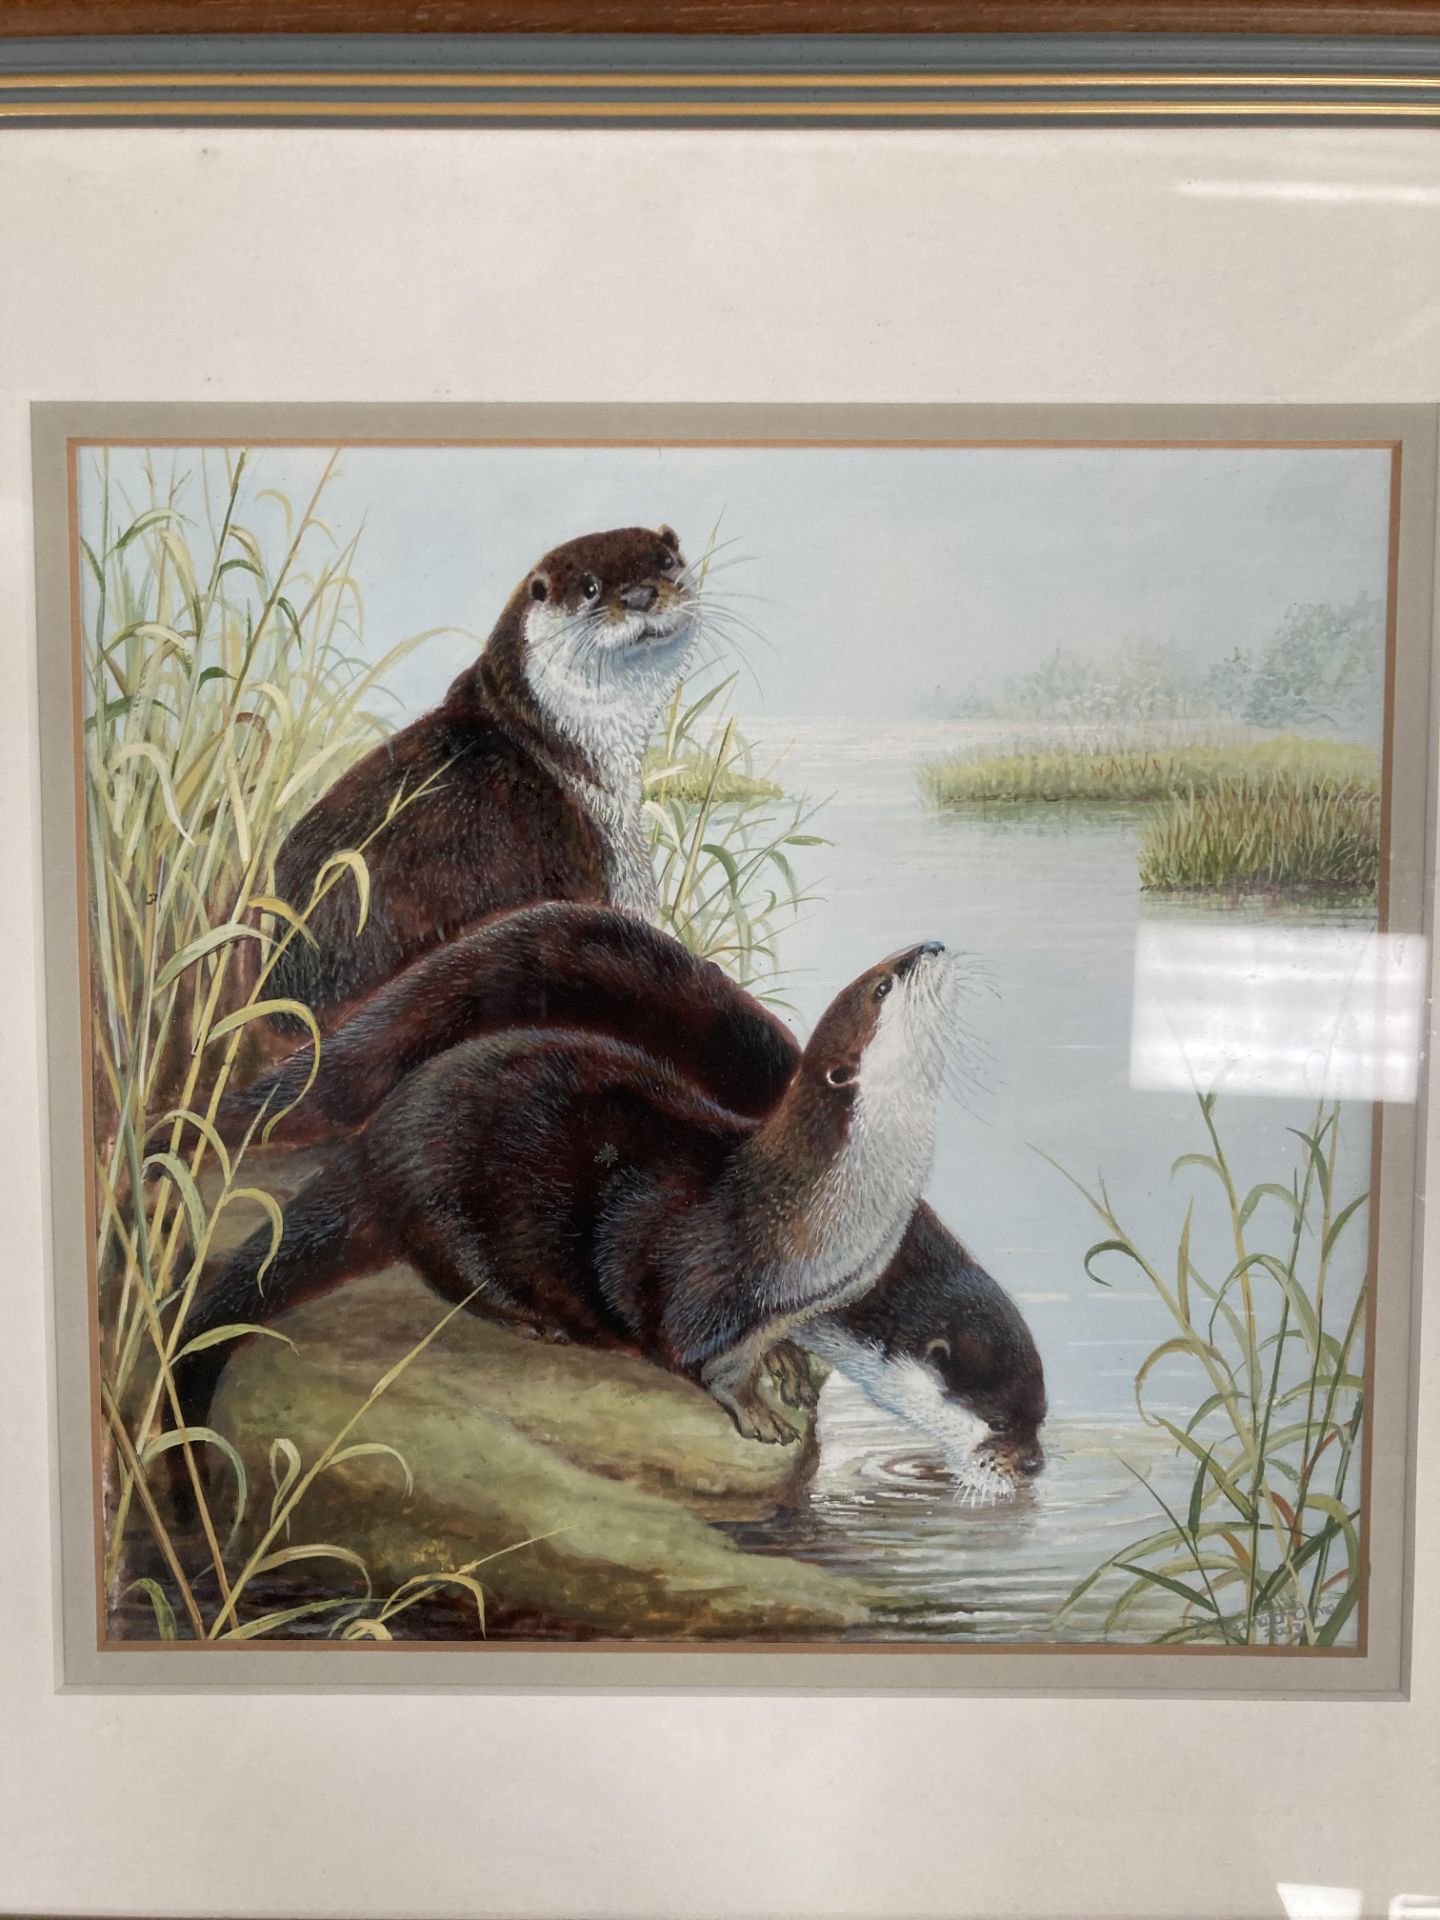 Elizabeth Garnett-Orme small framed watercolour 'Otters' 20cm x 20cm signed and dated '2003